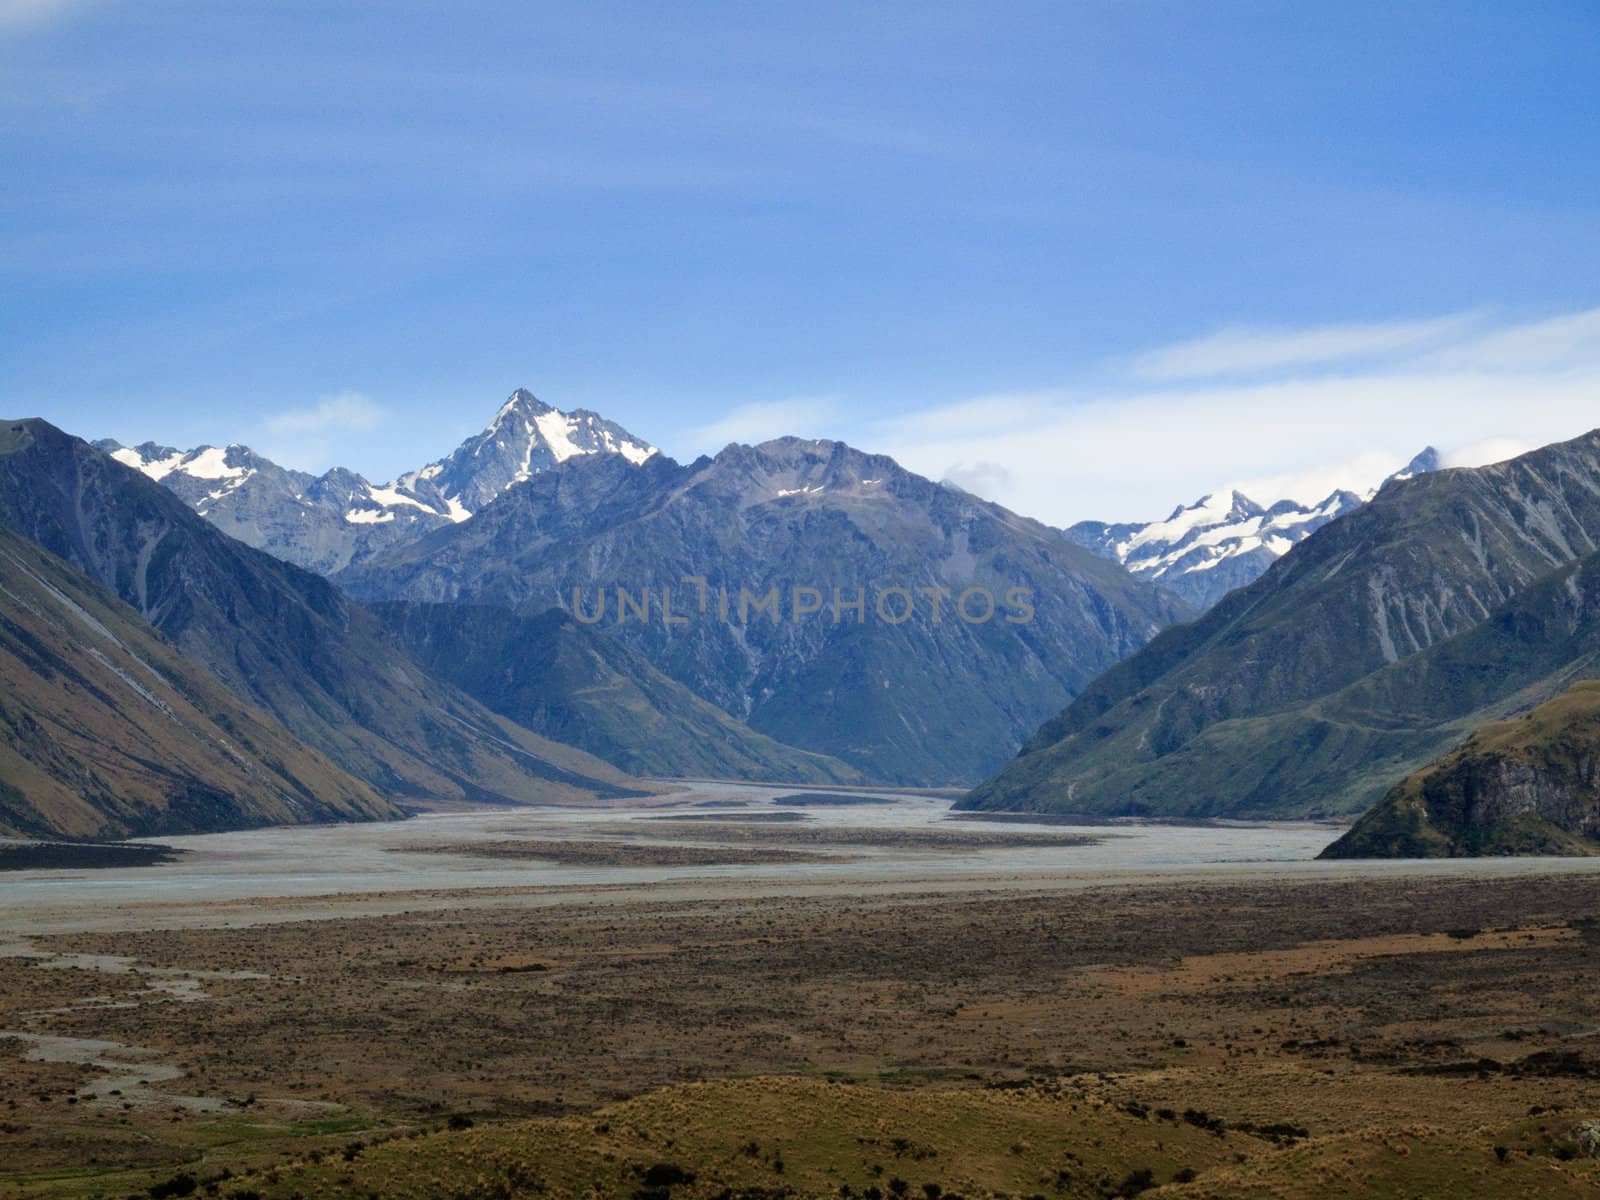 Mount Cook in New Zealand with a river valley in the foreground